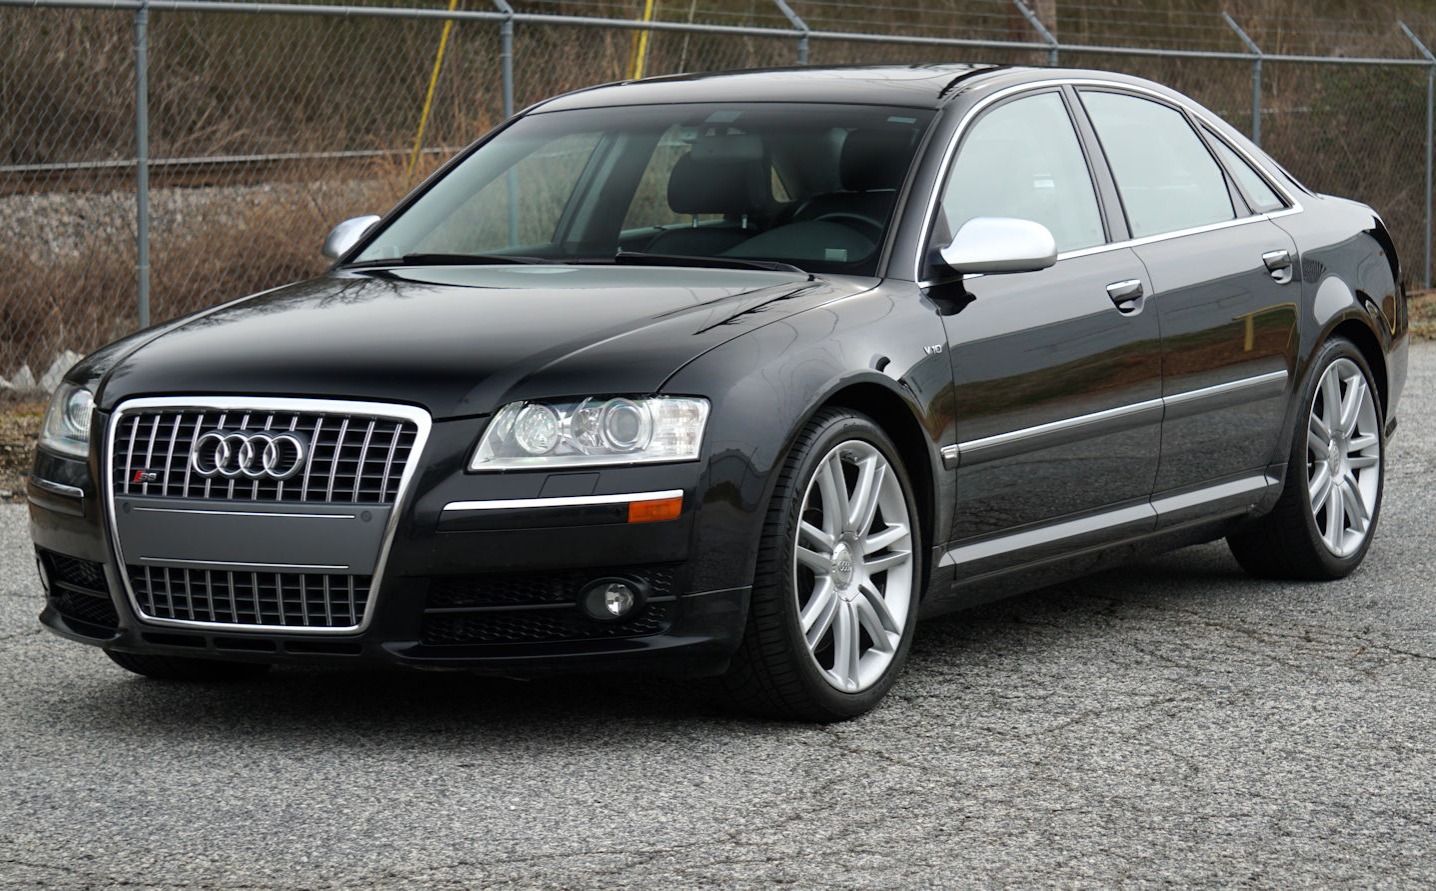 One-Owner 2007 Audi S8 V10 for sale on BaT Auctions - sold for $21,385 on  March 6, 2019 (Lot #16,870) | Bring a Trailer